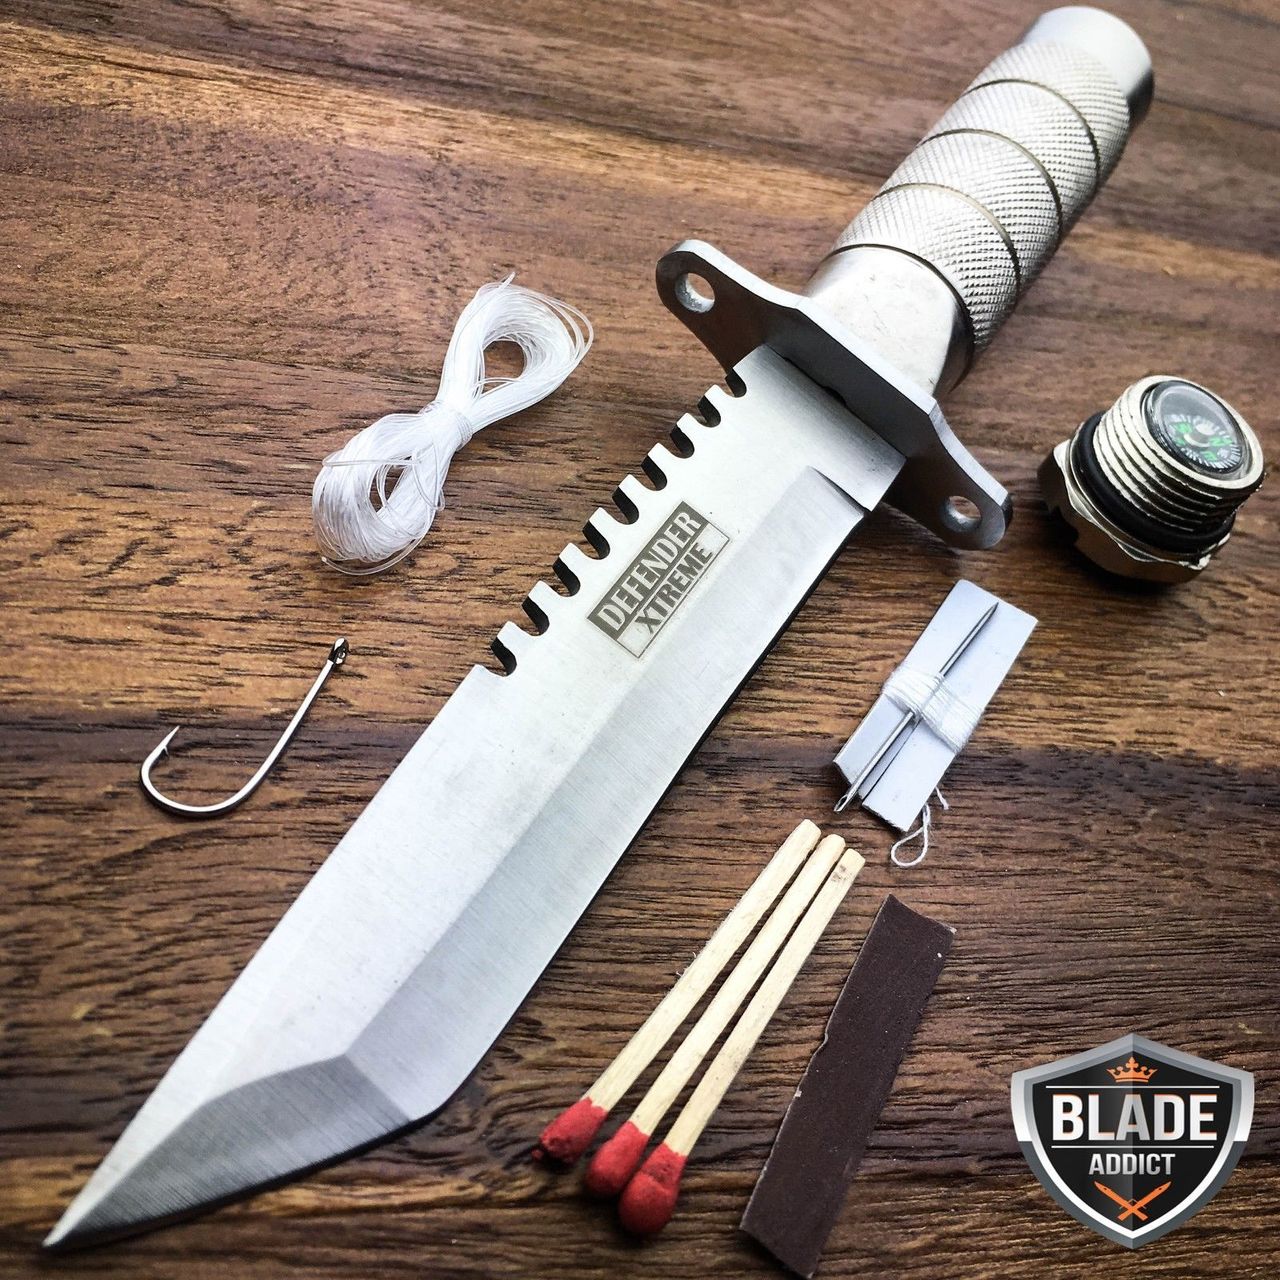 12" Military Survival Bowie Knife